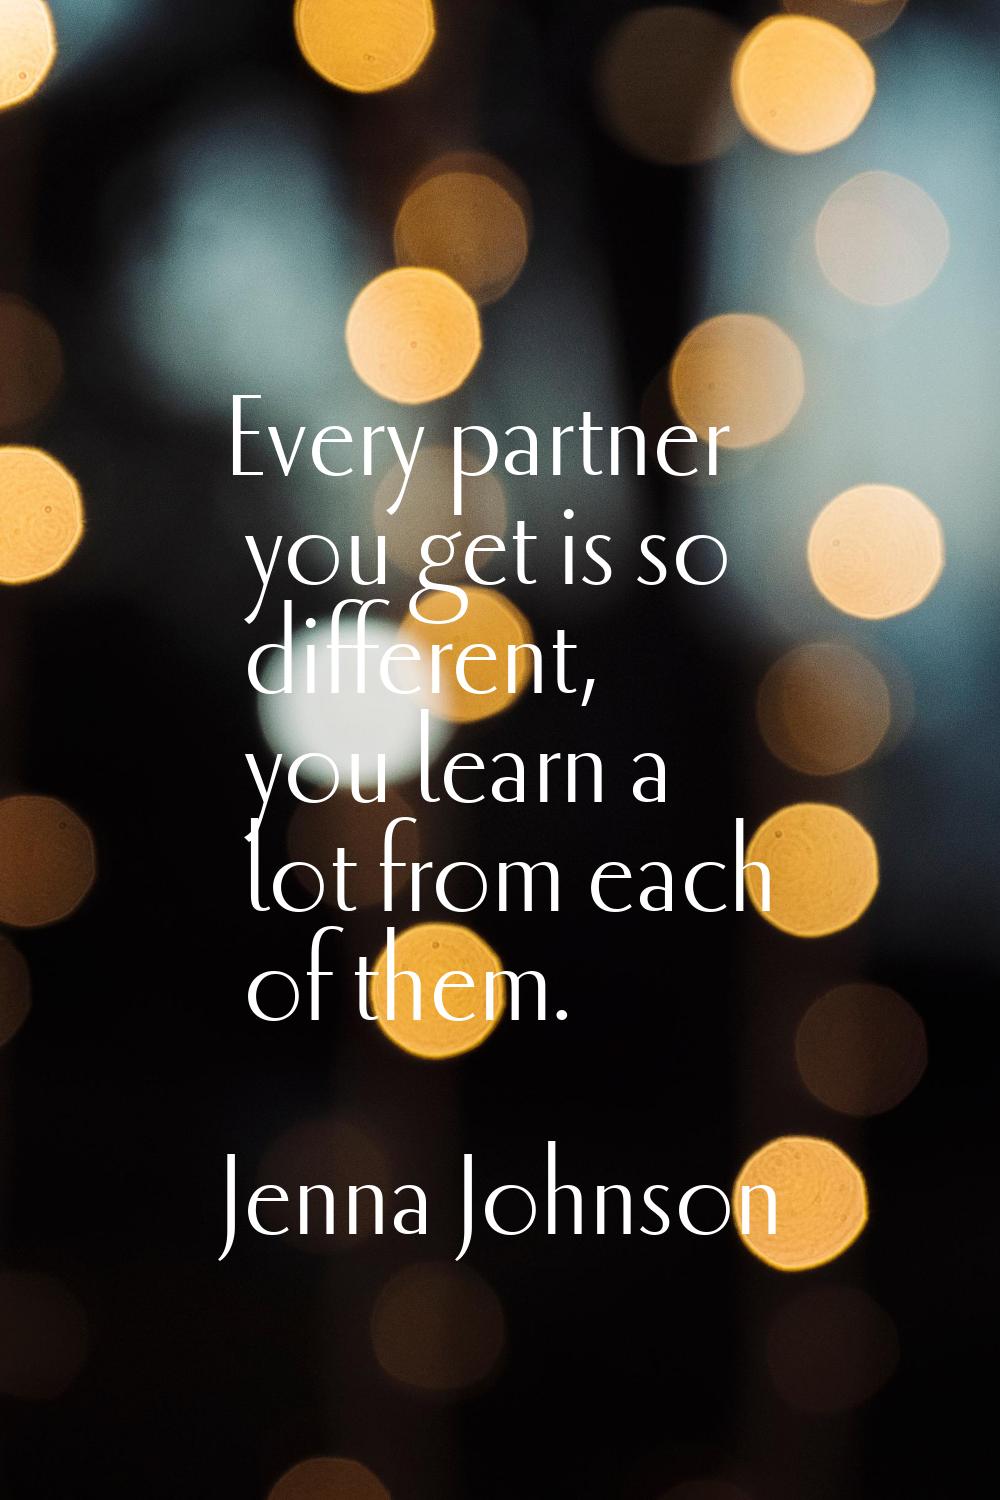 Every partner you get is so different, you learn a lot from each of them.